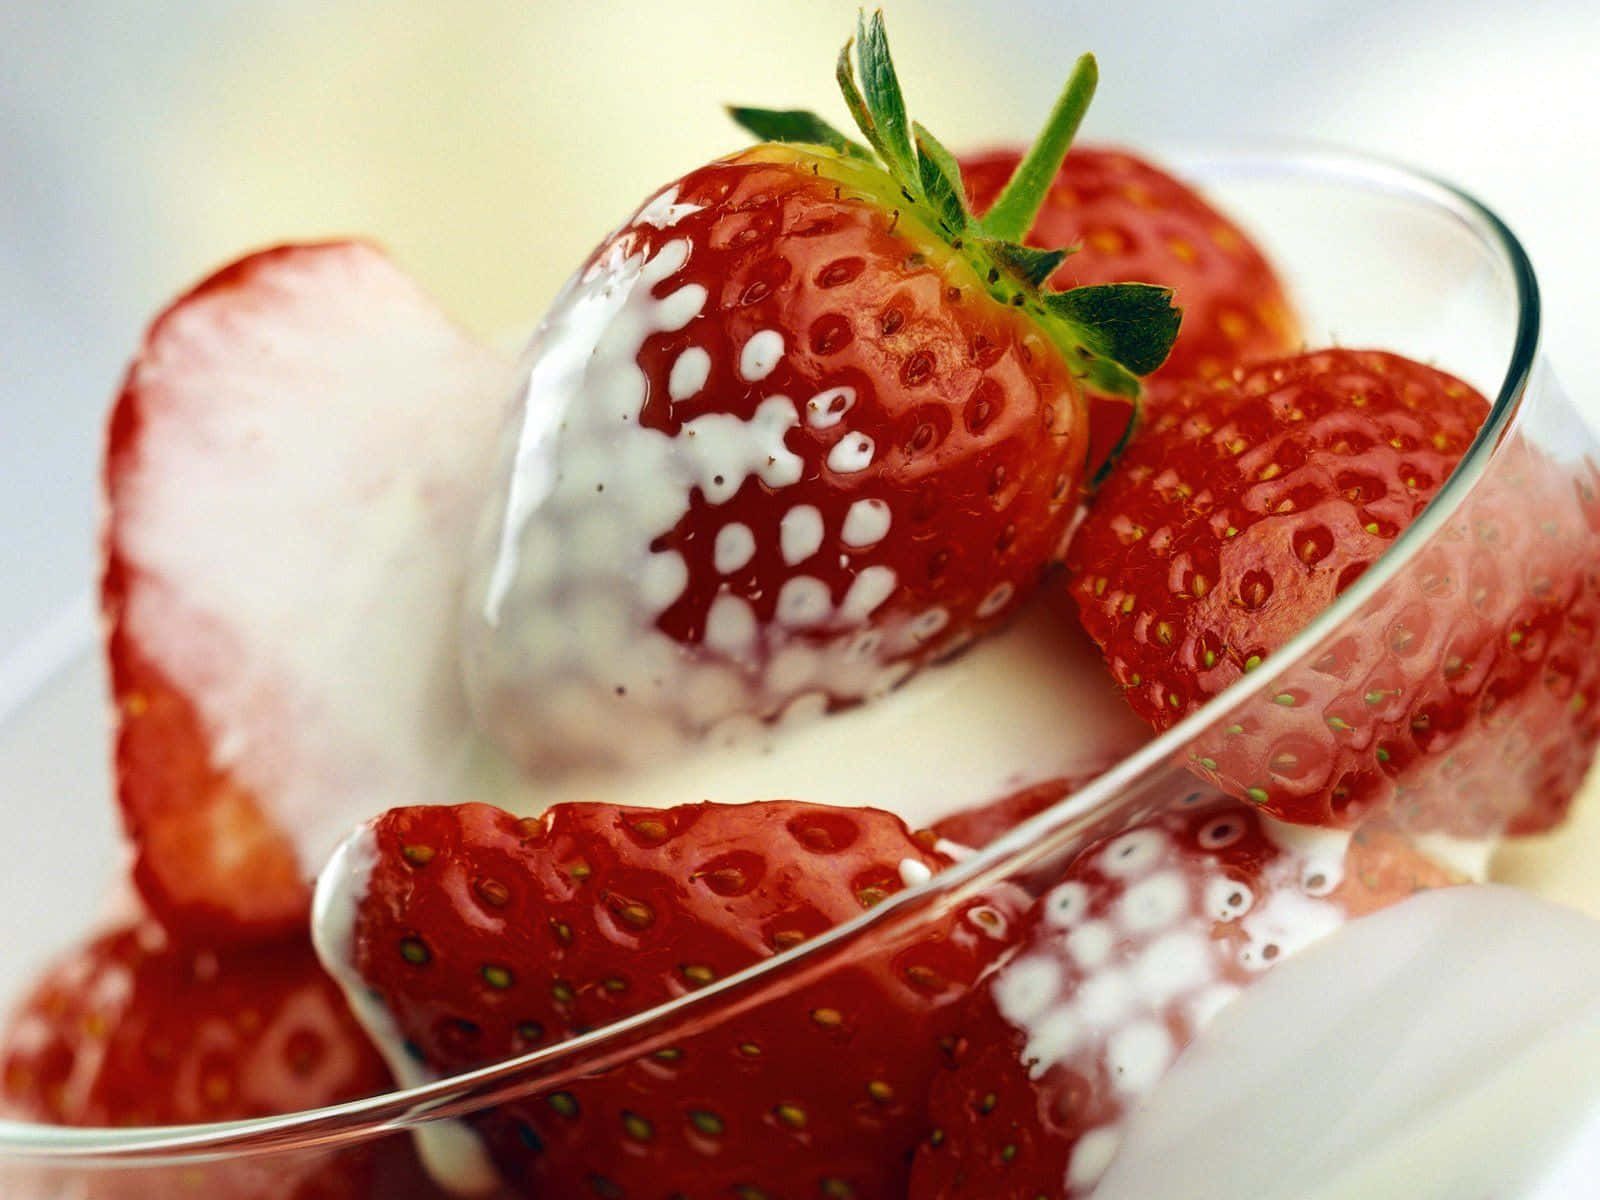 Enjoy the sweetness of summer with Cute Strawberry! Wallpaper